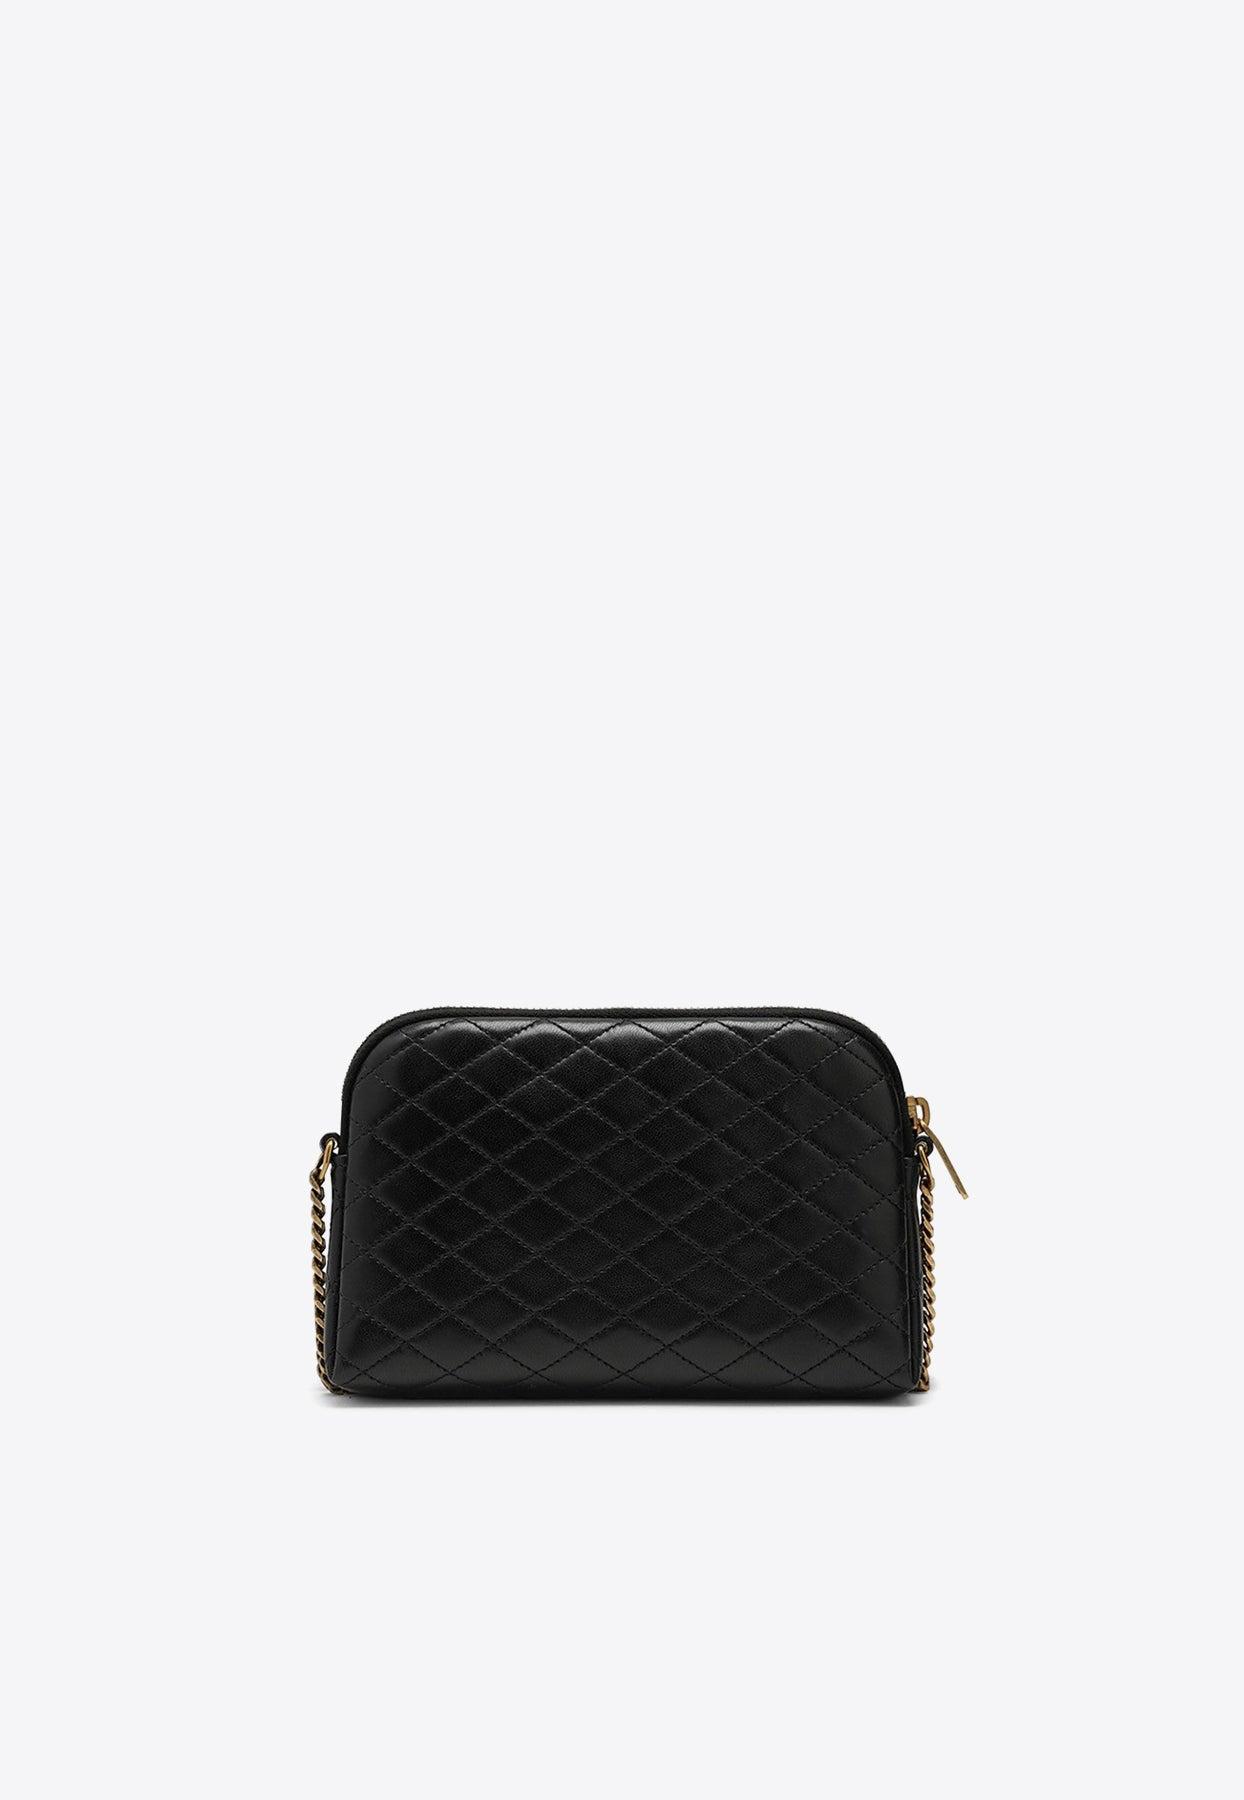 Saint Laurent Gaby Quilted Leather Crossbody Bag in Black